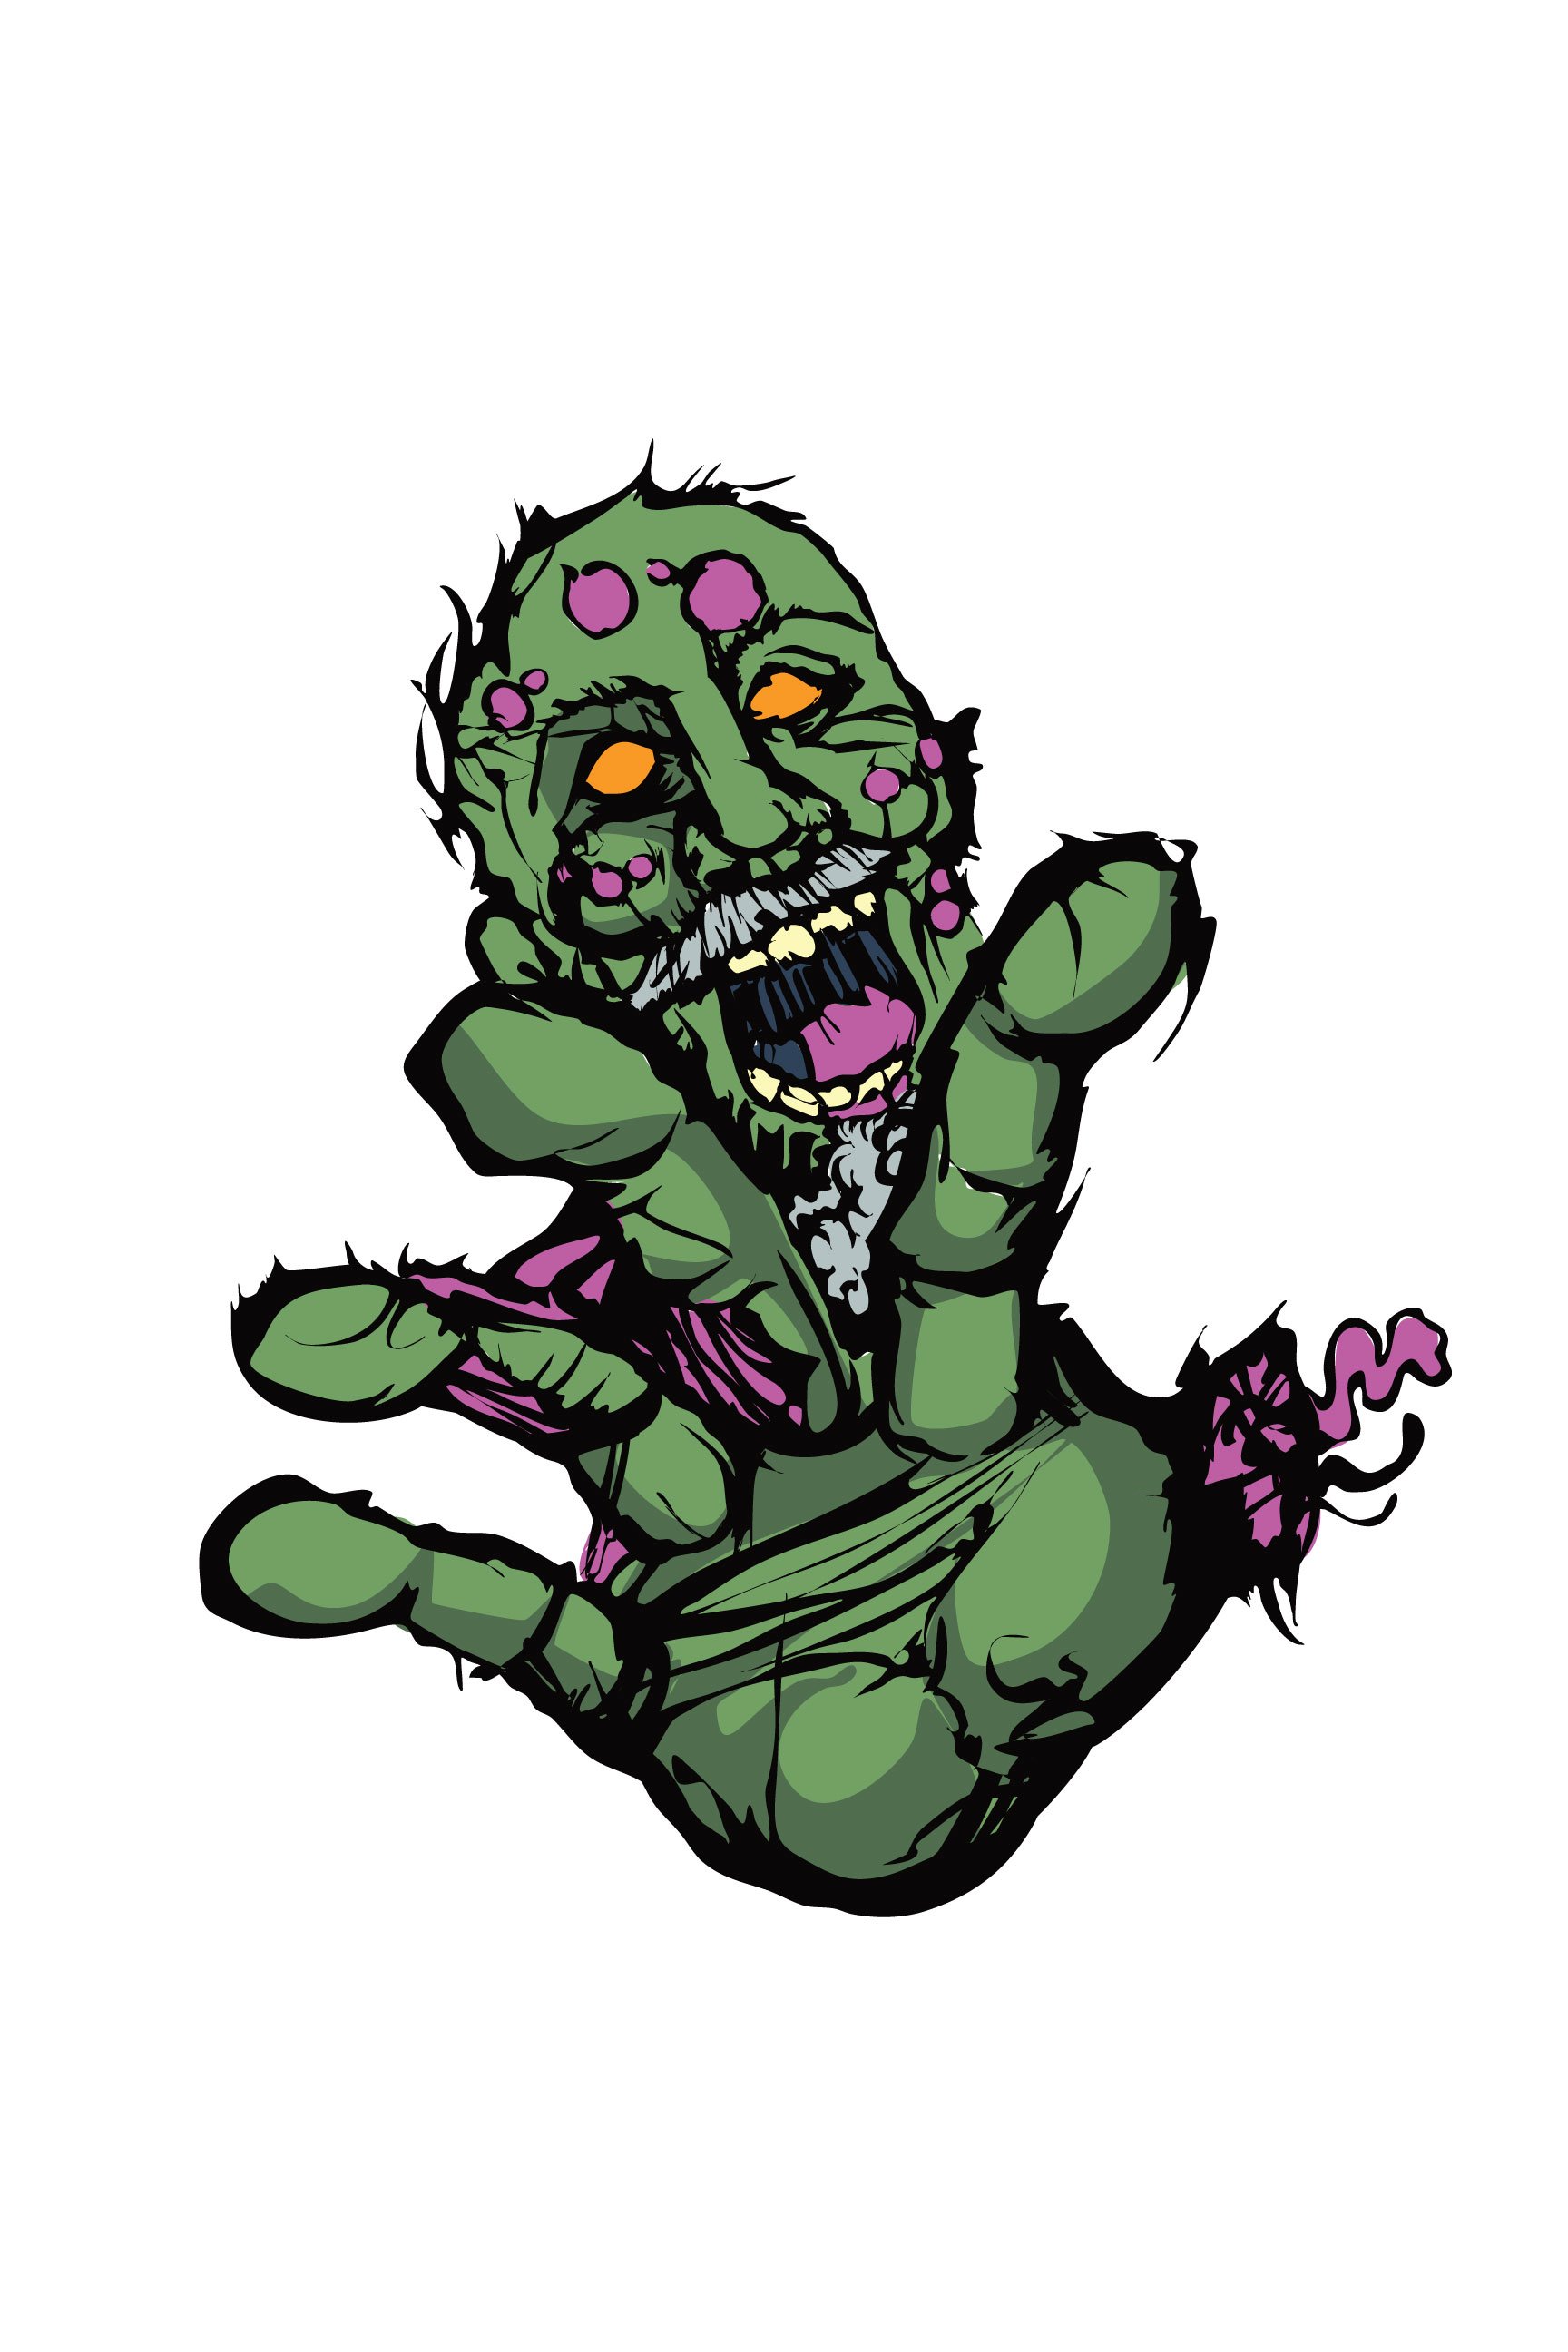 RR_Zombie_Guy_Outlines_and_Color_CompA_v001_LAYERED.jpg